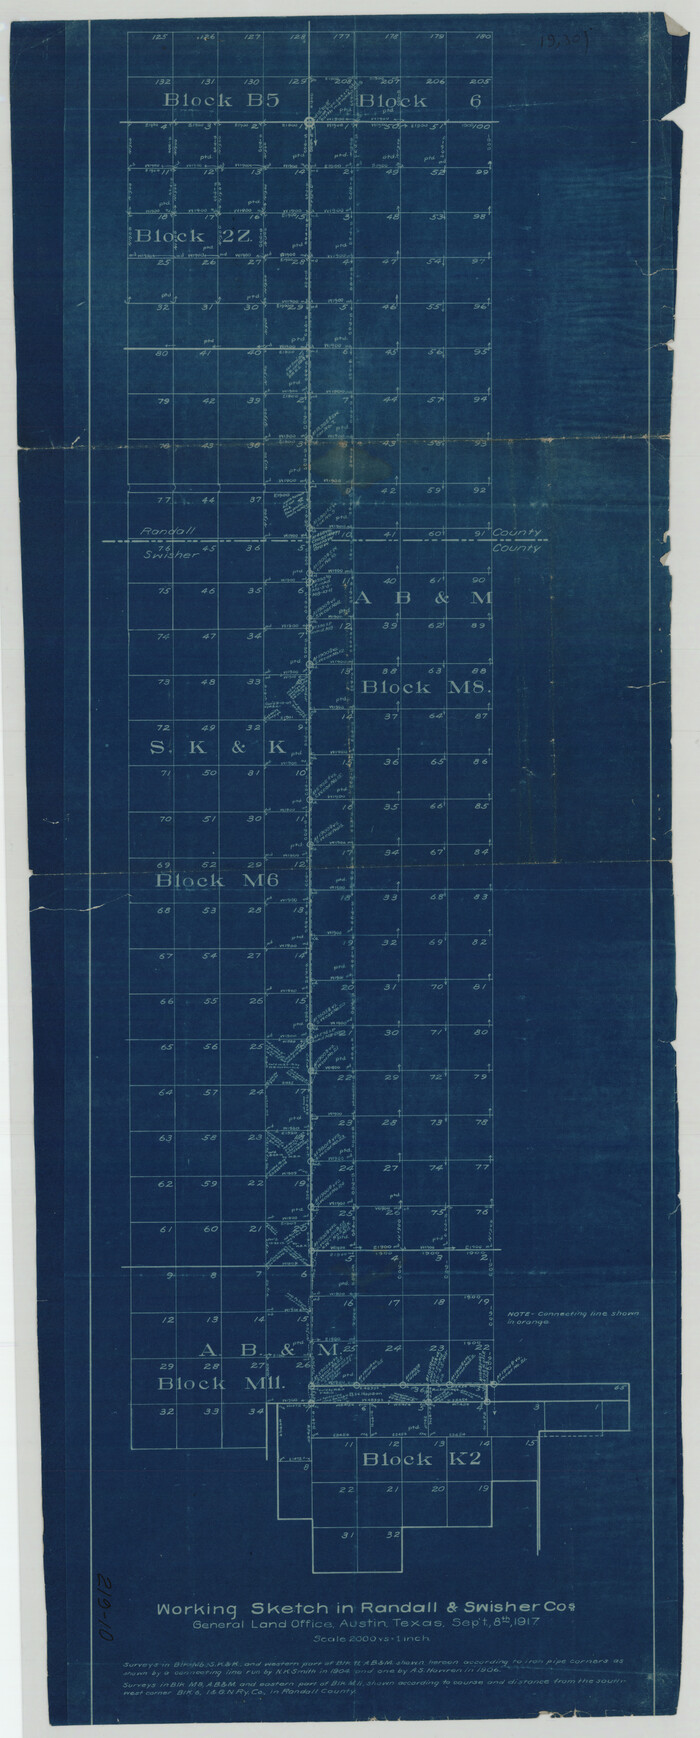 93048, Working Sketch in Randall and Swisher Cos., Twichell Survey Records